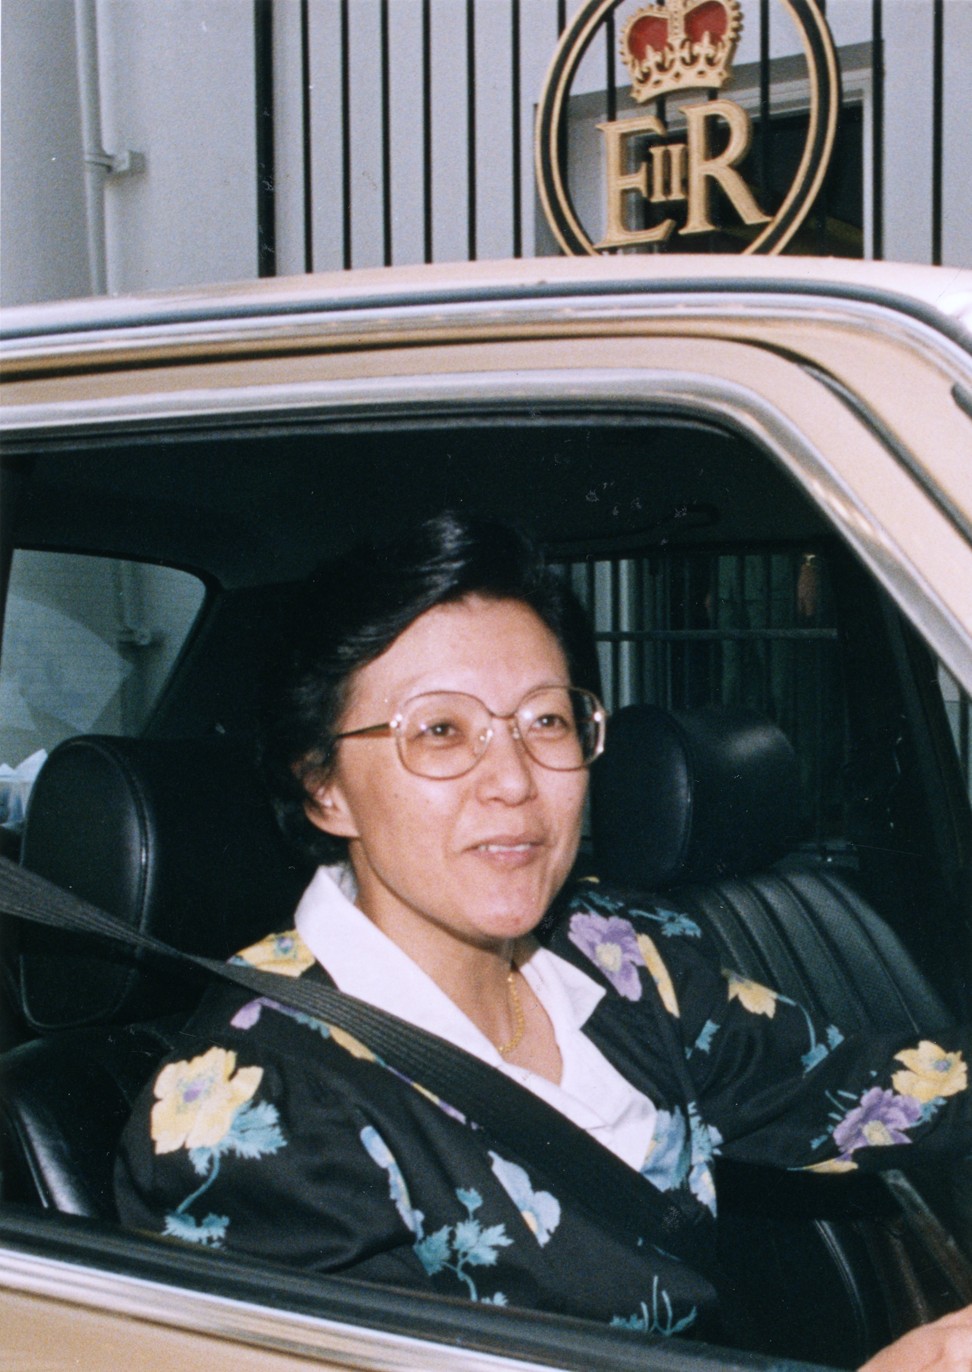 Rita Fan leaves Government House back in October 1992. Photo: SCMP